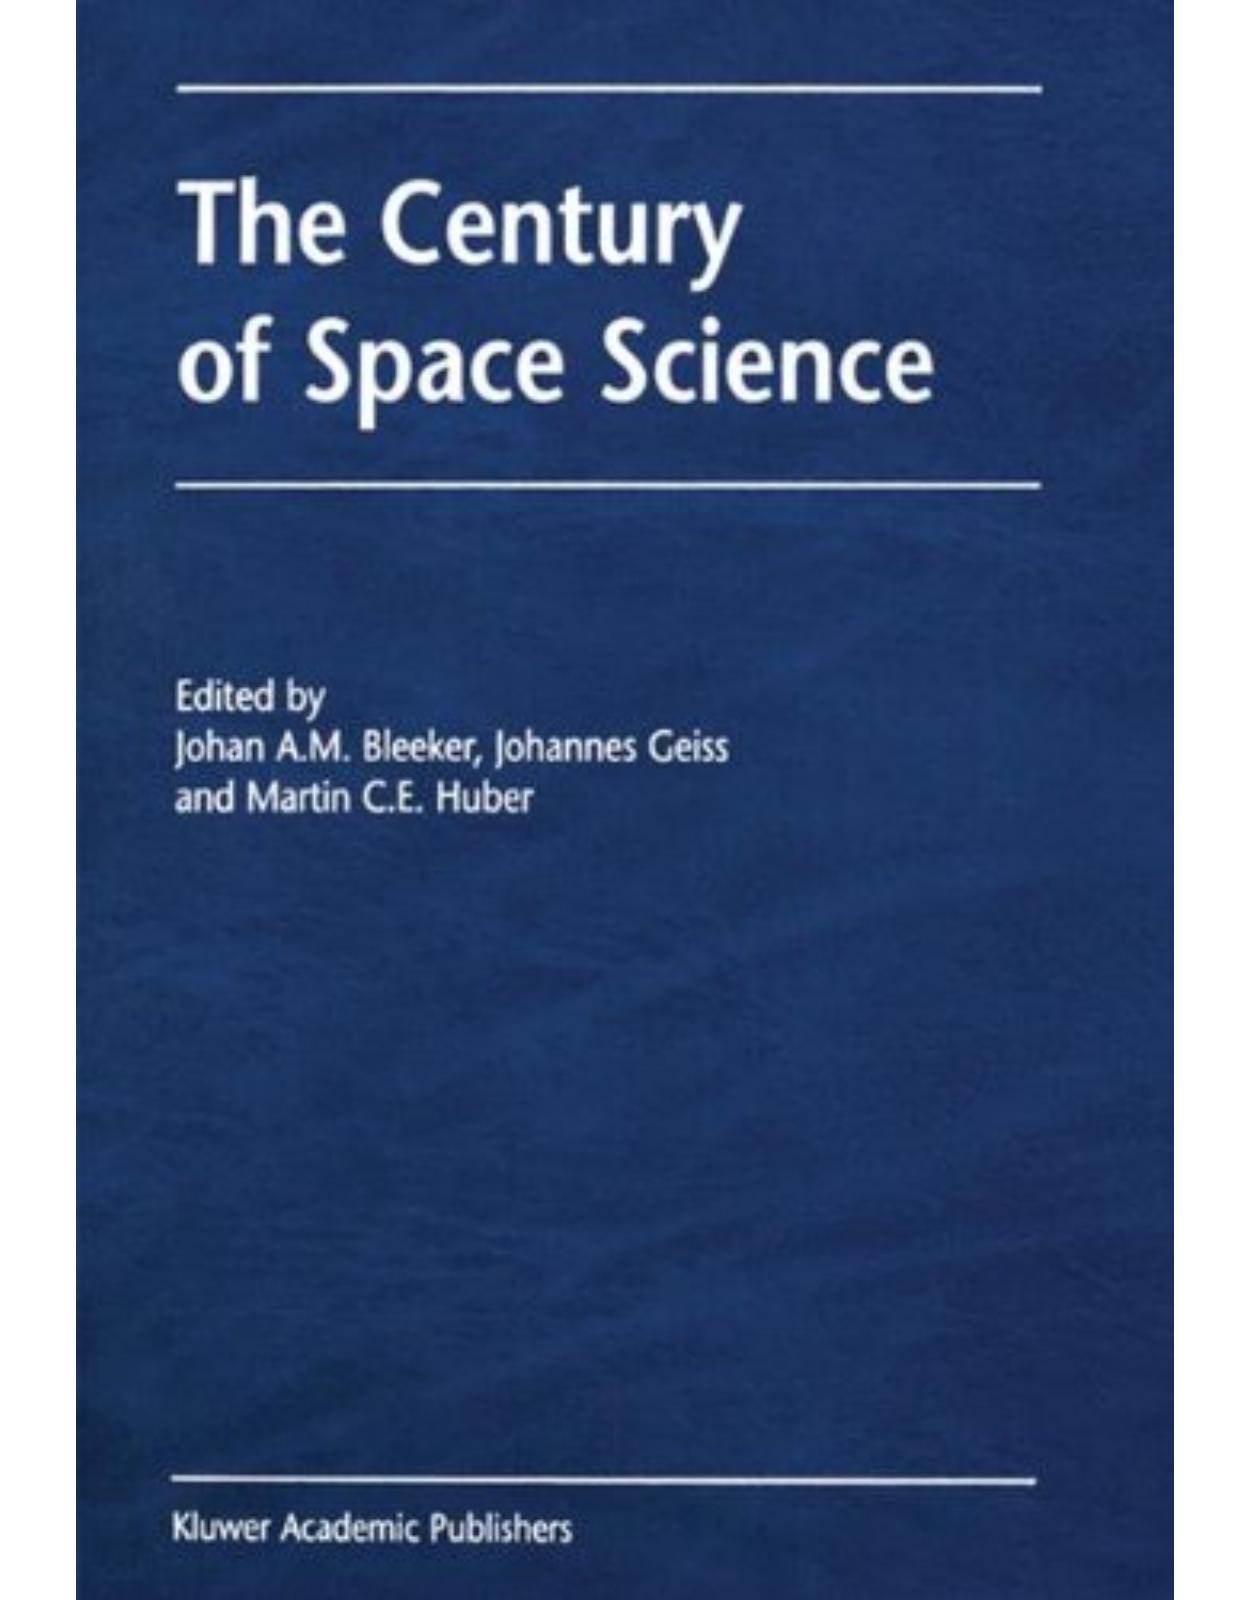 The Century of Space Science